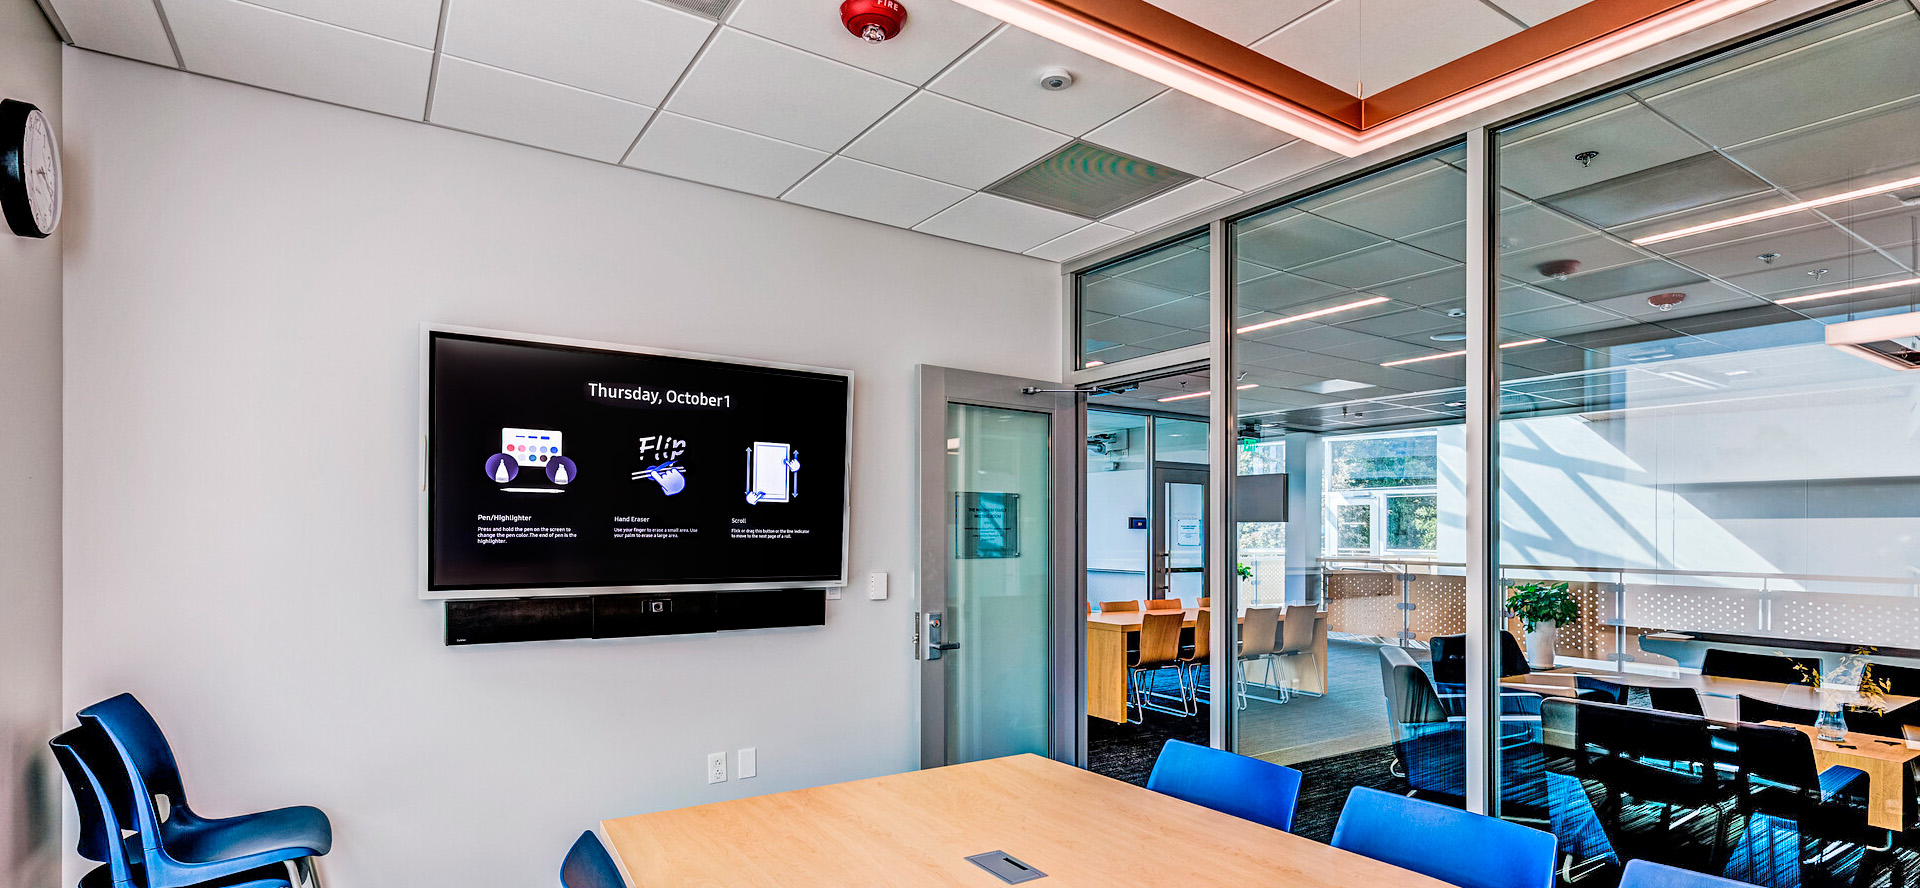 To facilitate collaboration within each classroom as well as the meeting rooms, the design team chose Extron scaling presentation switchers, DTP extenders, SoundField speakers, and Pro Series or MediaLink Plus control products.